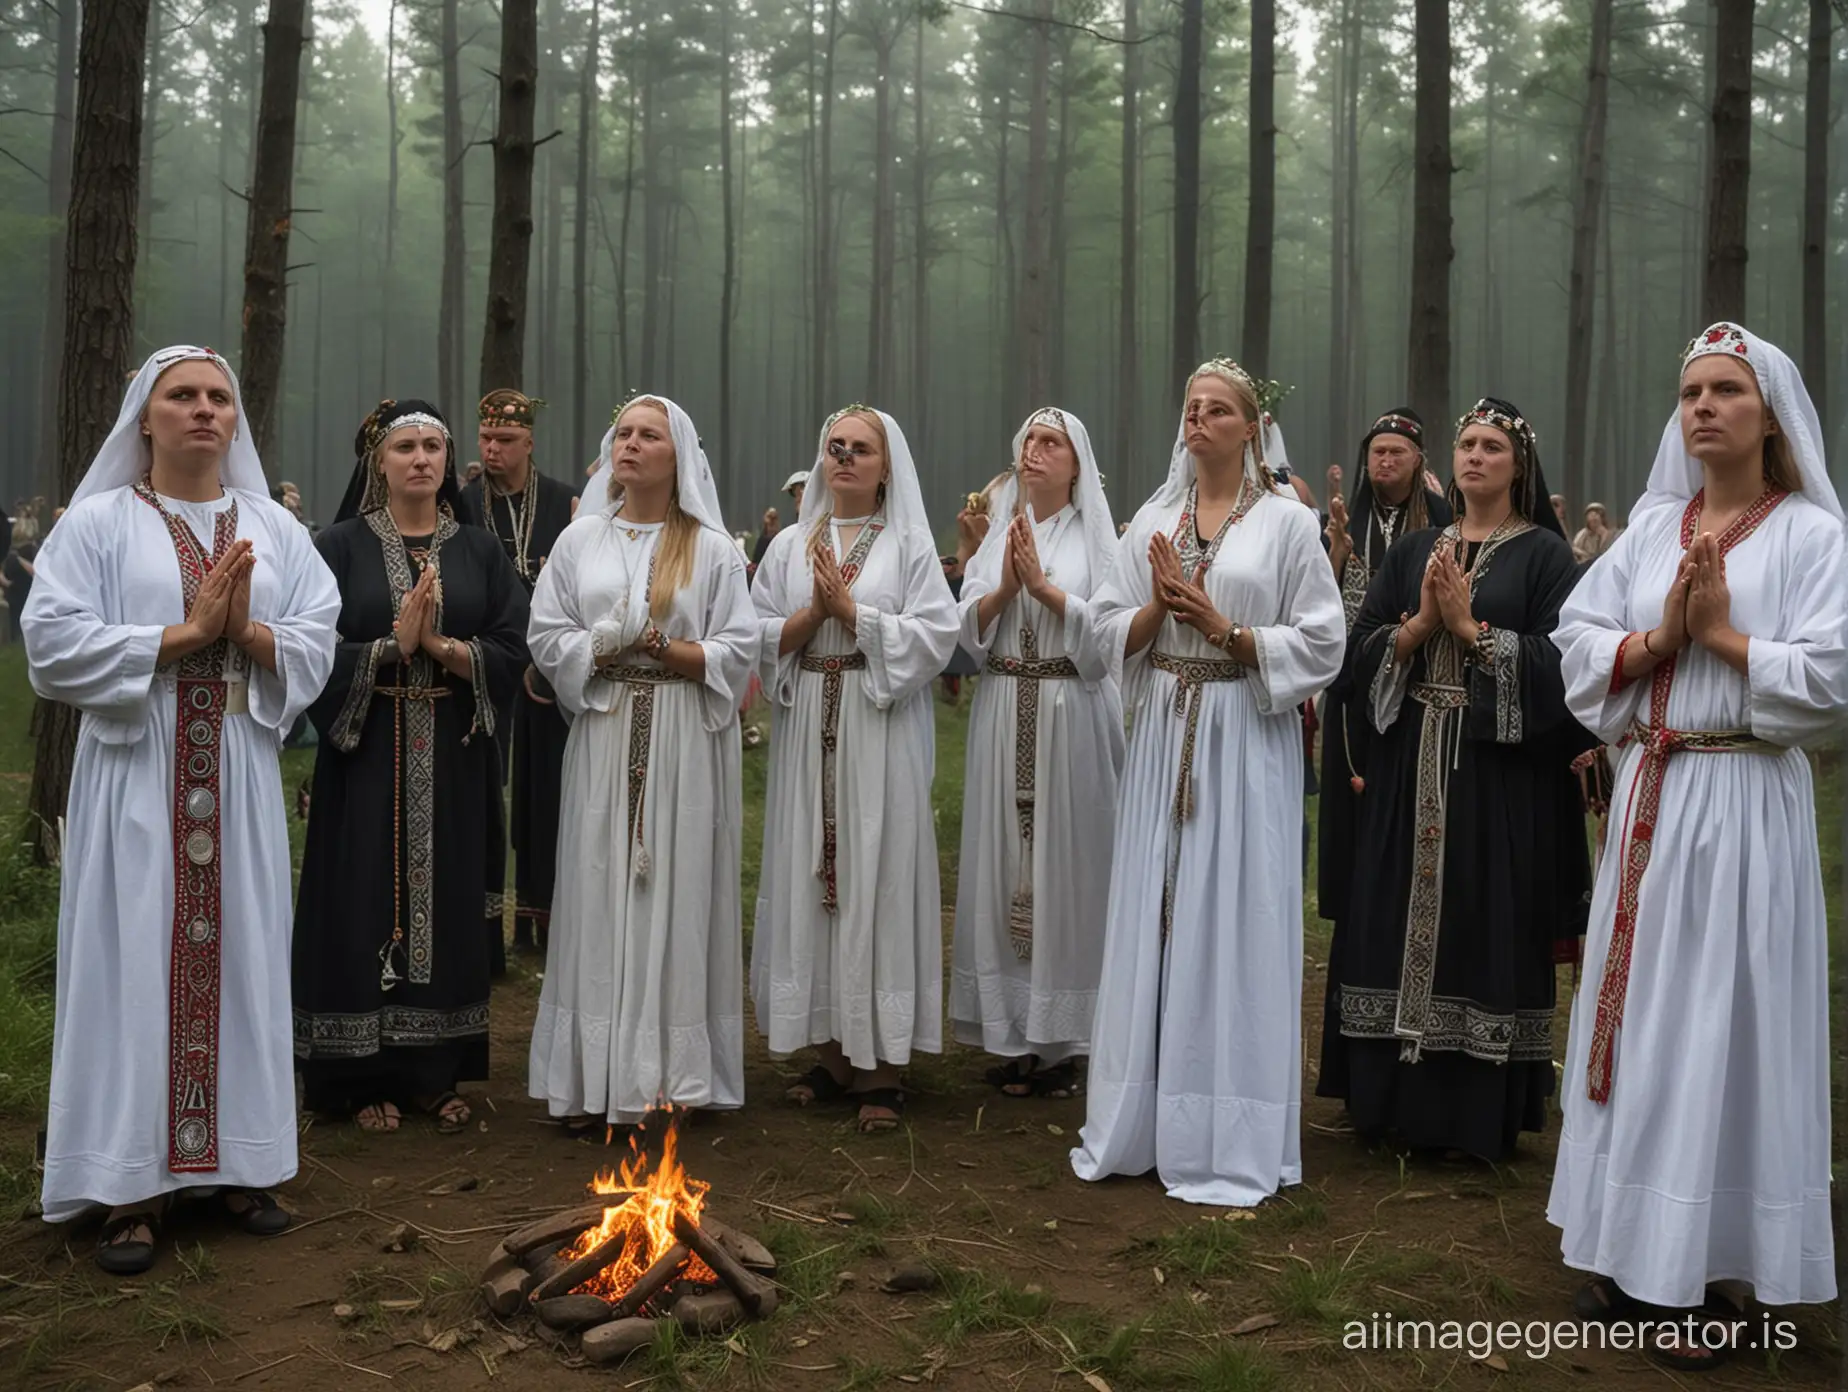 In the forests during an eclipse, the Slavic pagan cult conducts its ritual during a solar eclipse